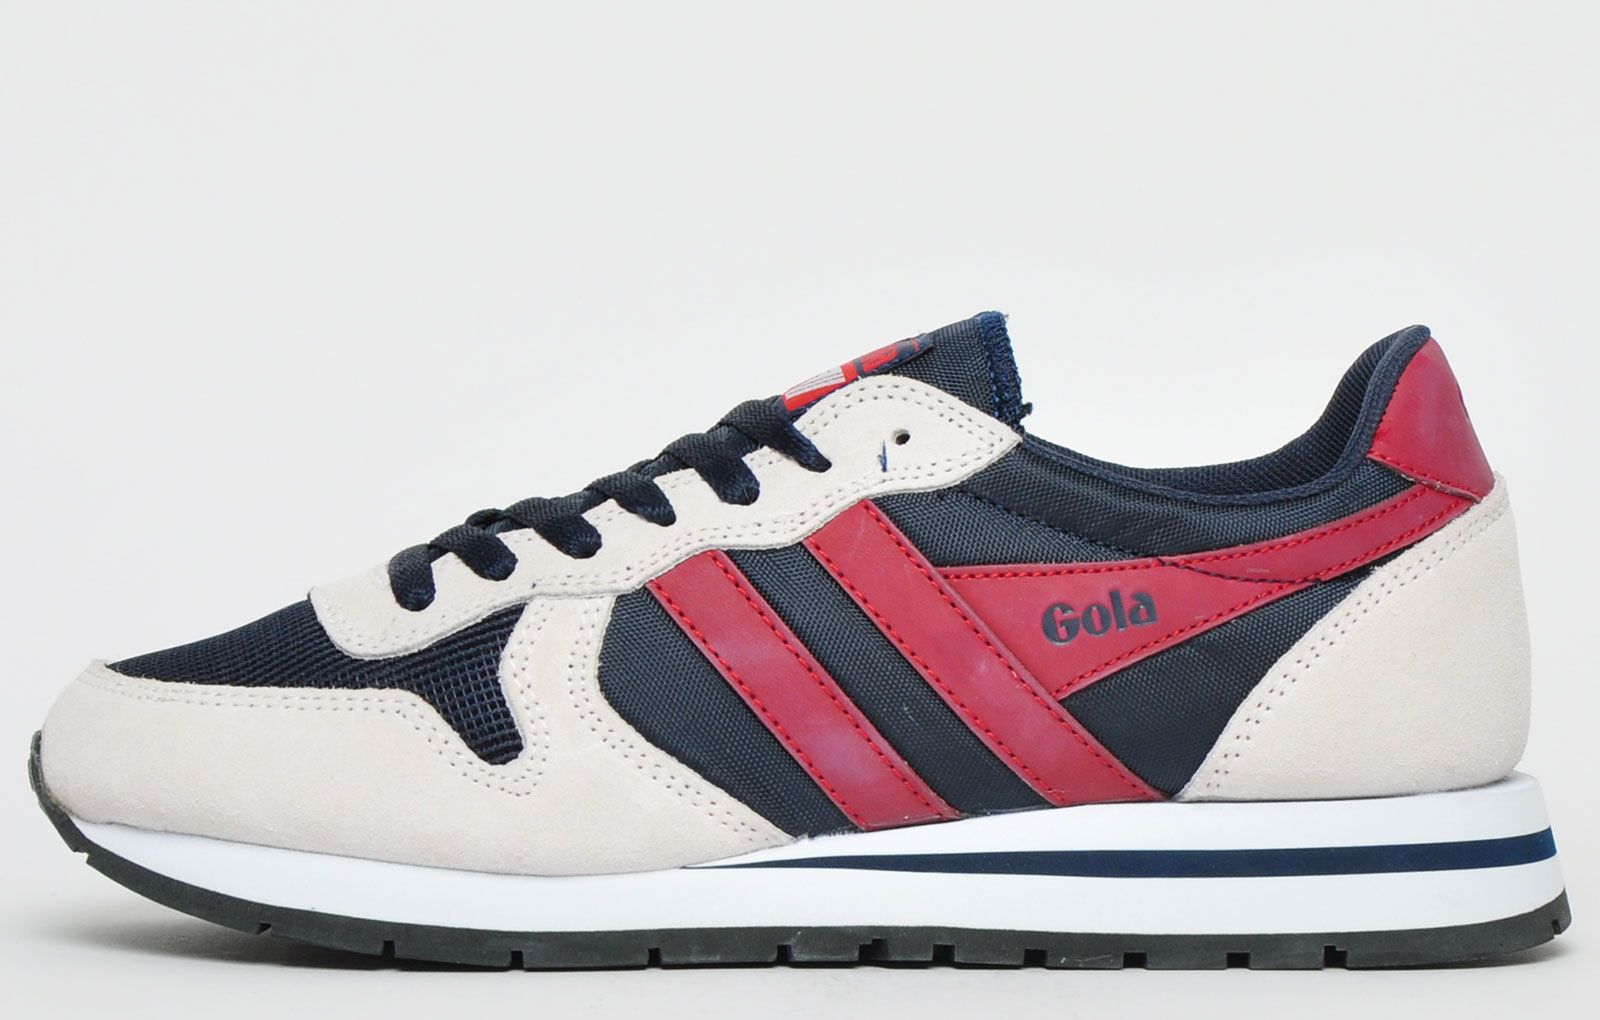 <p>Born in Britain in 1905, Gola holds its British Heritage close to its heart. Gola has been associated with numerous high profile sporting legends over the years and was the number 1 British Sportwear brand of the 1960`s and 70`s. Gola still produces some of the most iconic trainers of today and yester years too by reaching back into its archives to deliver authentic retro styling with occasionally a flavour of modern aesthetics. Gola creates footwear for those who choose not to follow the crowd and who want to stay true to the vintage retro trainer look.</p> <p>A vintage inspired jogger meets ‘90s on trend styling to form the outstanding Gola Classics Daytona for men. This reimagined version of Gola’s back catalogue style Daytona features a cushioned EVA midsole to give an authentic nod to Gola’s genuine heritage roots. Teamed with a textured suede leather, nylon textile and synthetic panelling mix this striking Gola Classics Daytona will be your go to trainers for years to come</p> <p>- Textile nylon and suede leather mix upper</p> <p>- Classic Lace up fit</p> <p>- Cushioned EVA midsole</p> <p>- Vintage styled retro jogger design</p> <p>- Cushioned insoles</p> <p>- Padded ankle support</p> <p>- Gola Classics branding thoroughout</p>